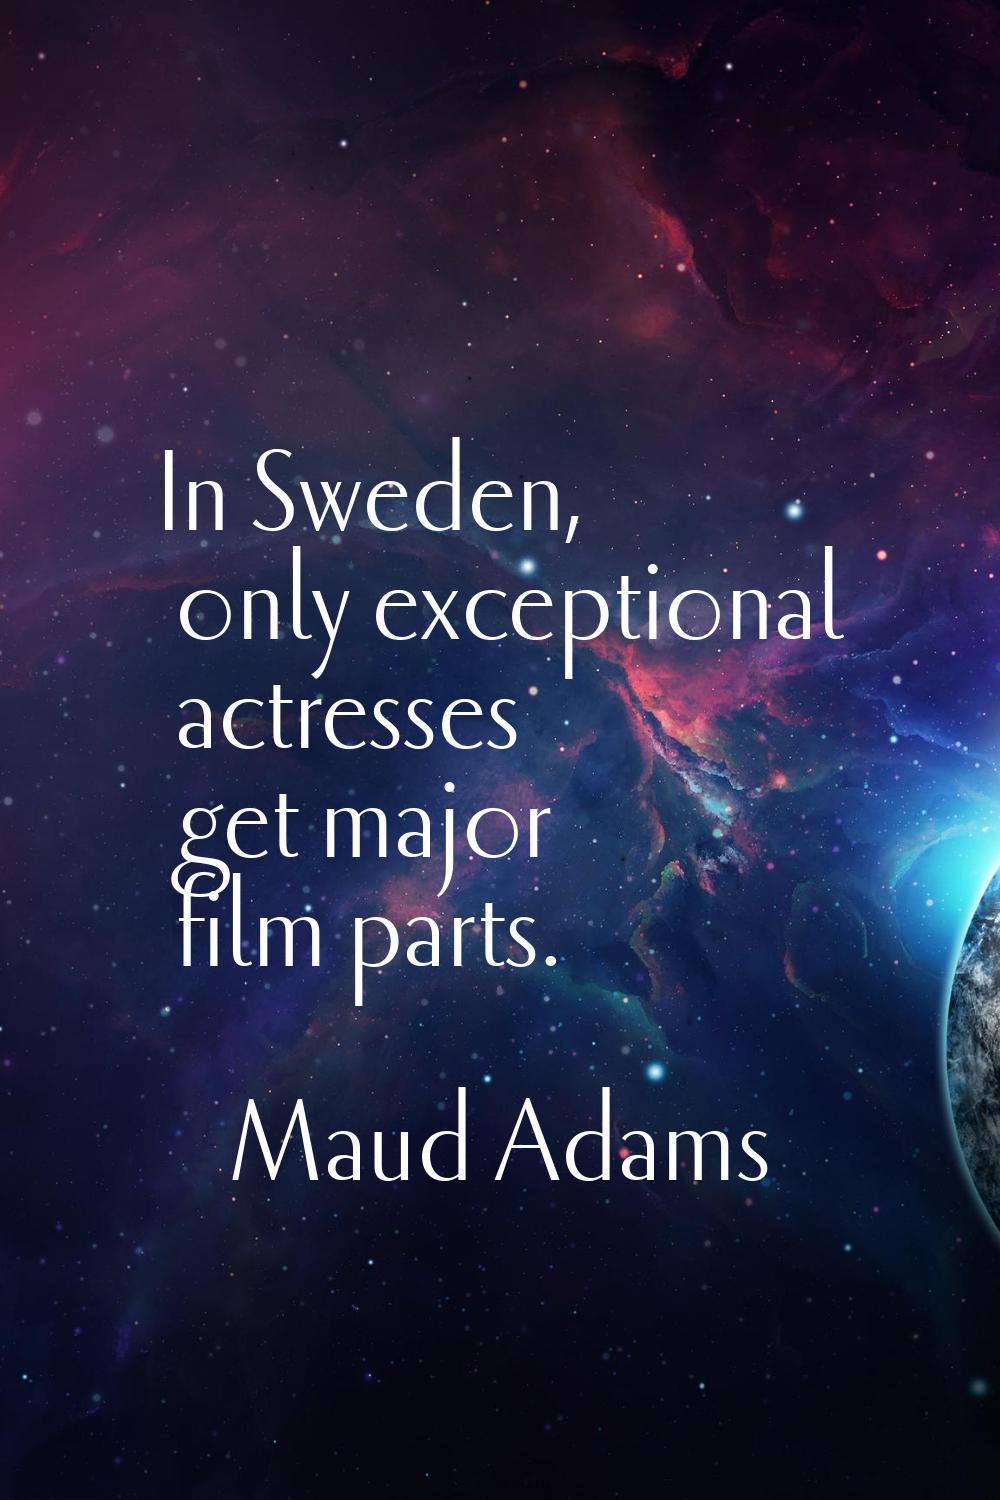 In Sweden, only exceptional actresses get major film parts.